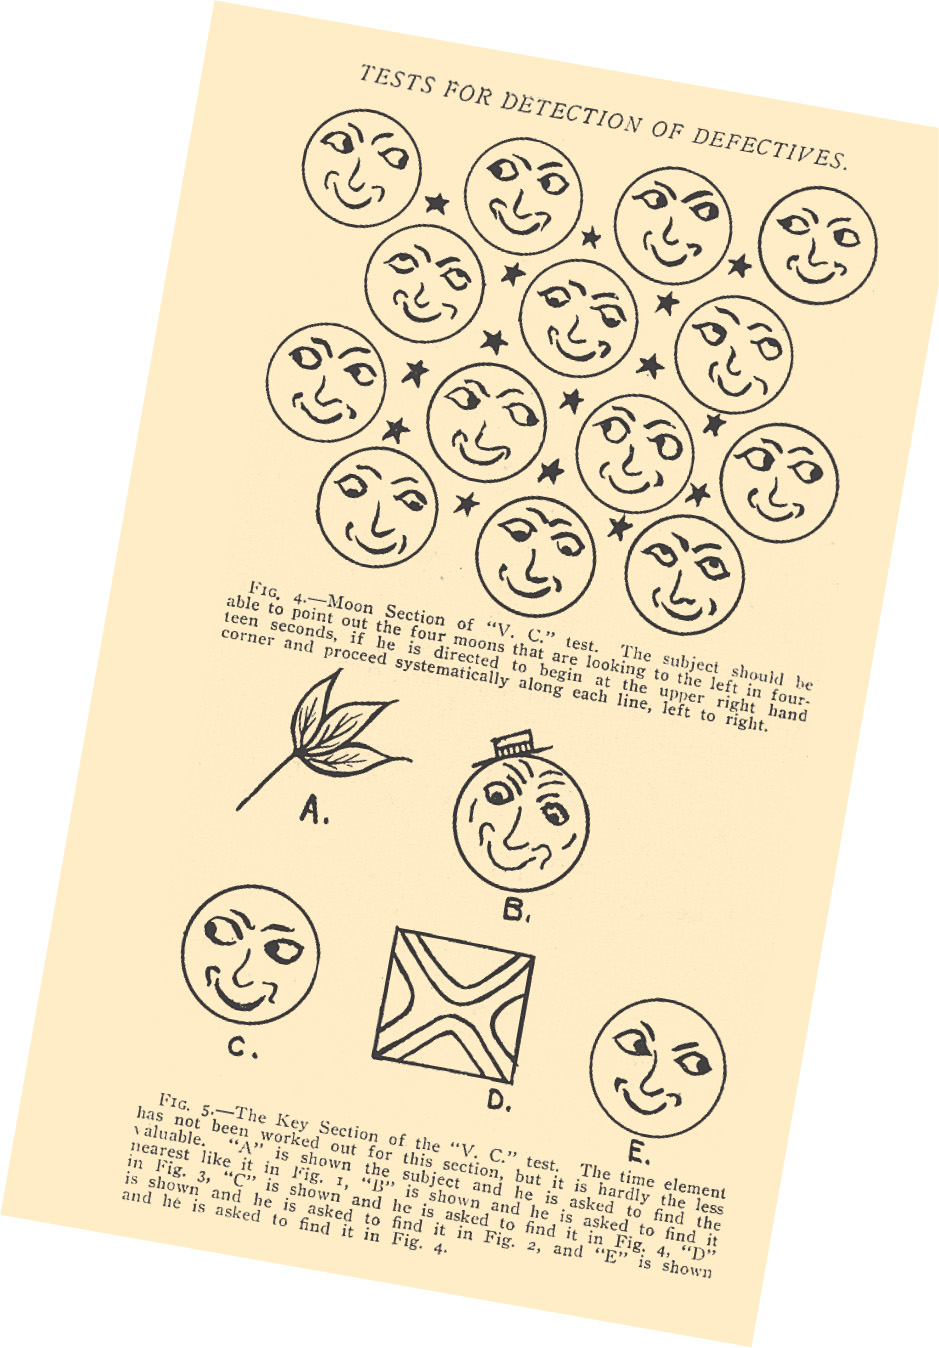 A photo: a test card shows sketches of 14 faces with eyes looking in different directions. Two at the top and two near the bottom look to the left.